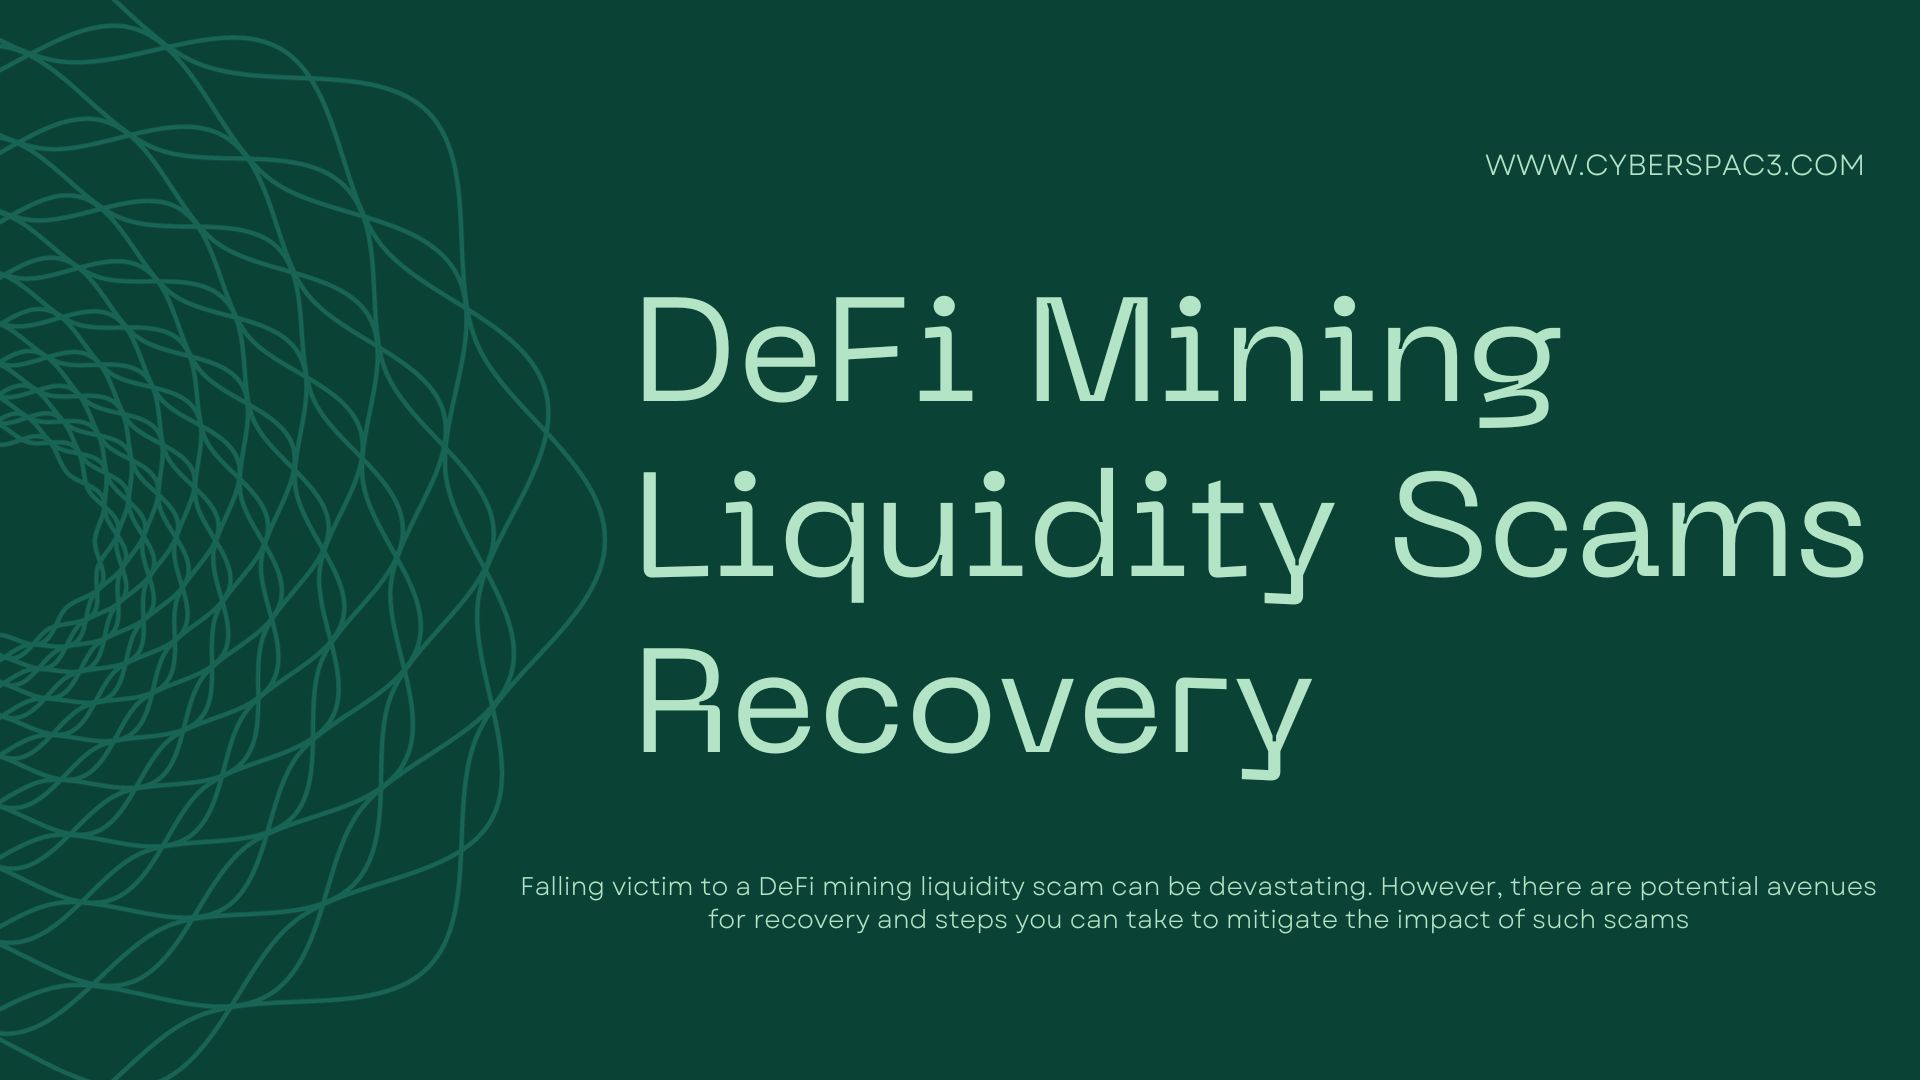 DeFi Mining Liquidity Scams Recovery